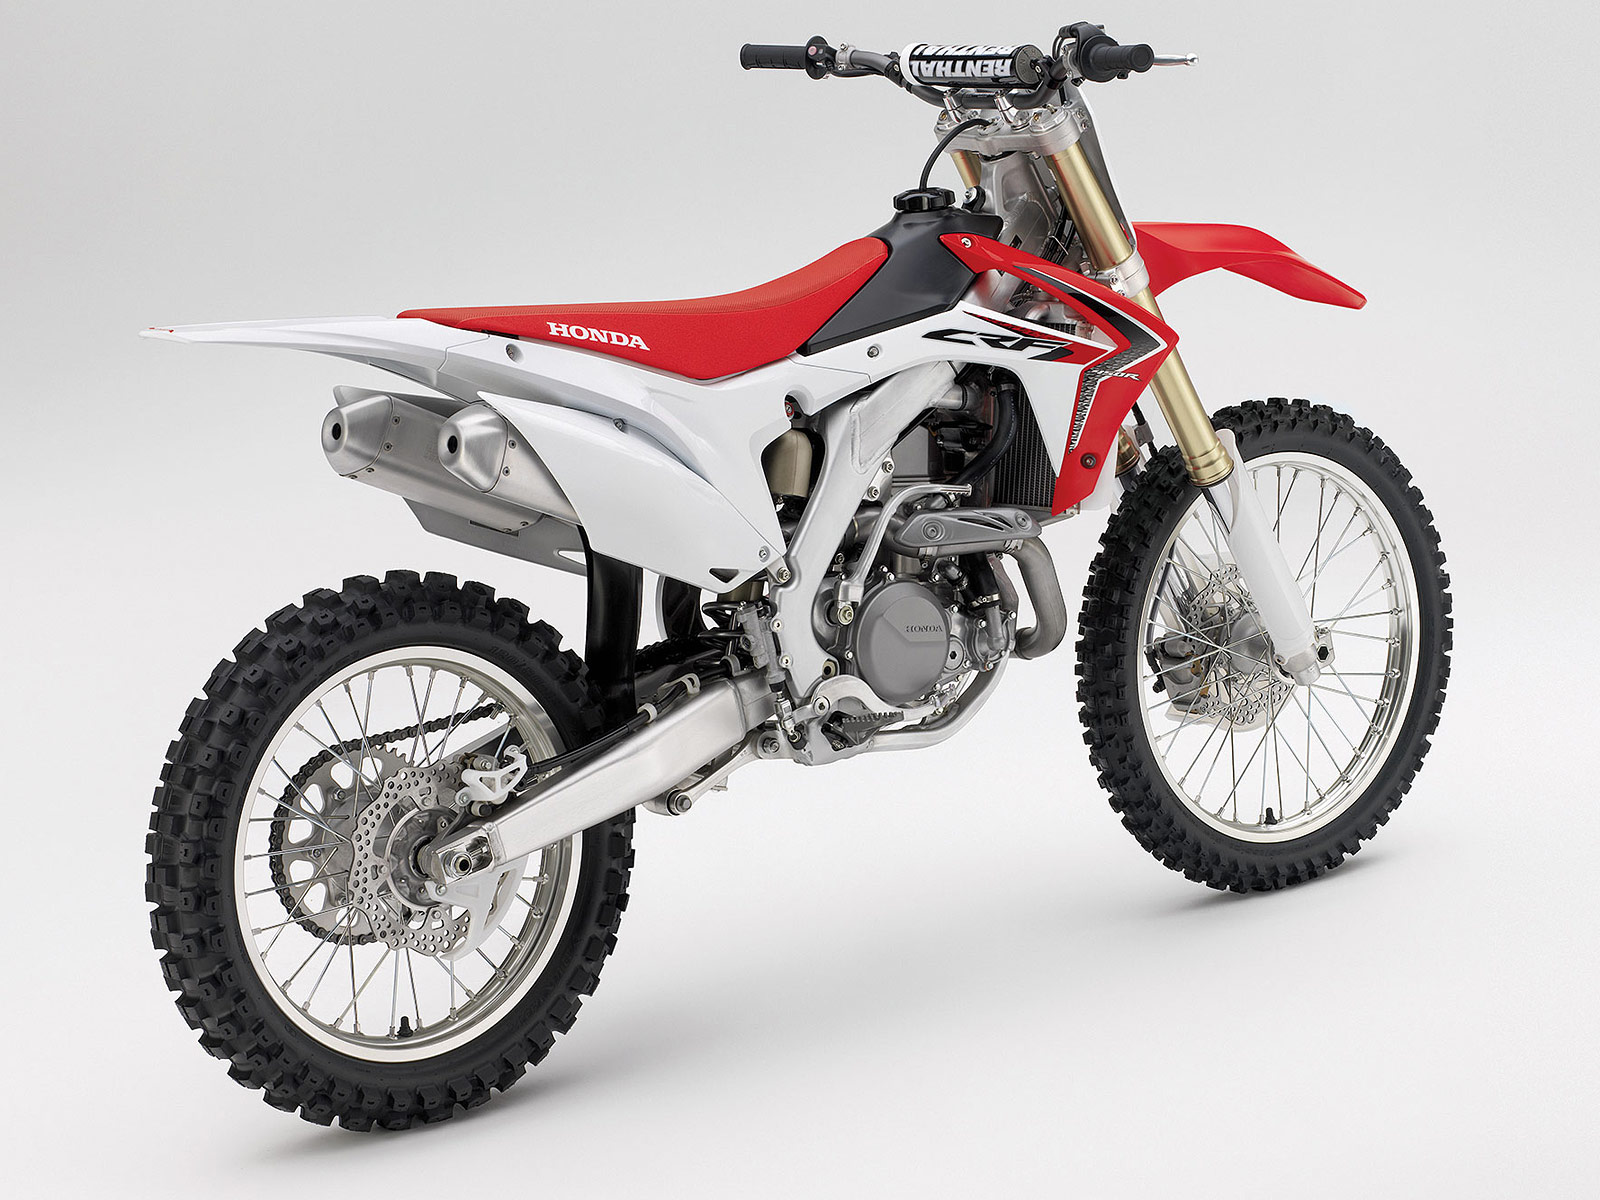  GAMBAR  MOTOR  2014 Honda  CRF450R specifications pictures 